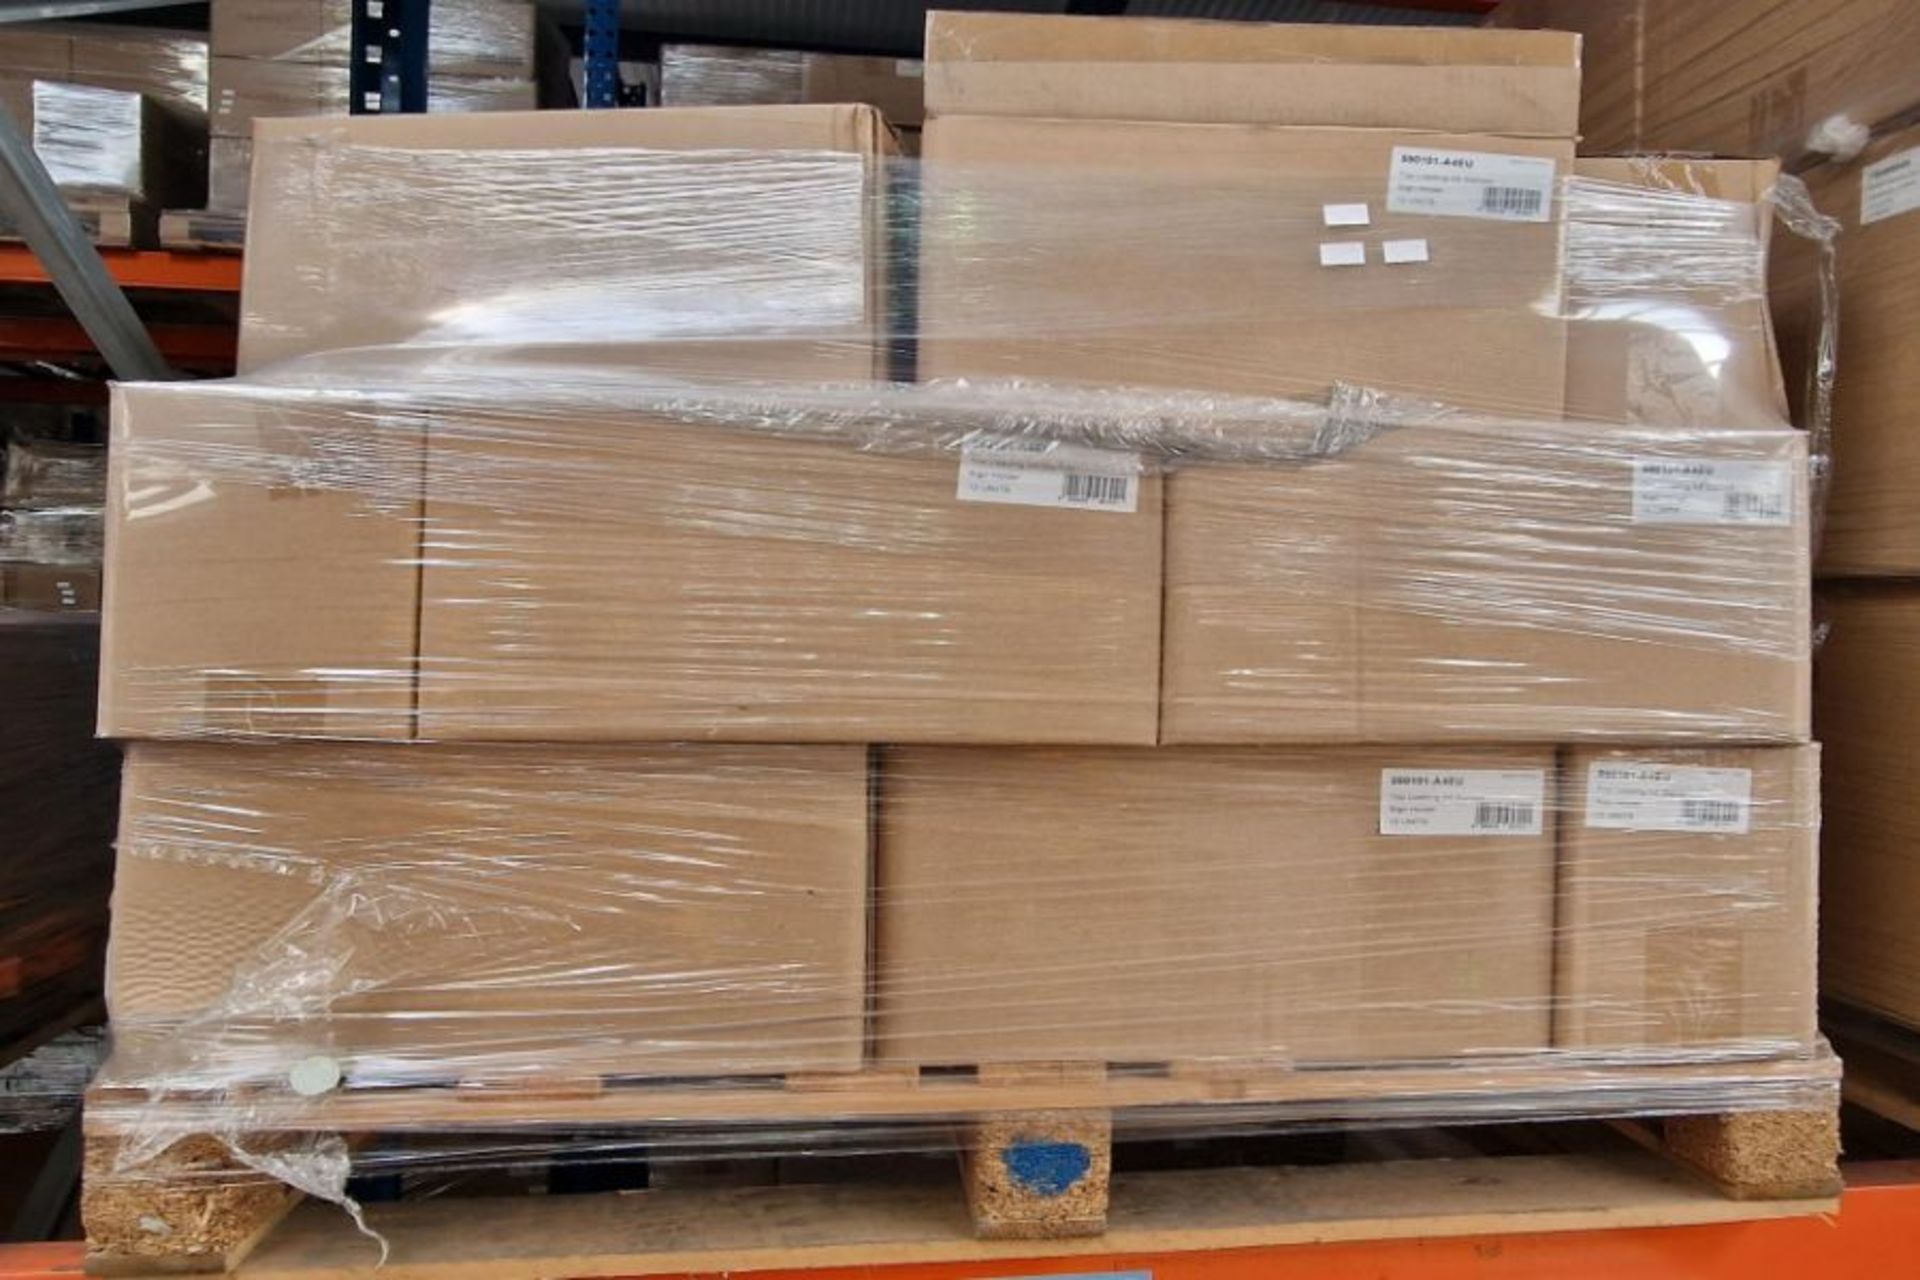 A pallet containing as new A4 top slanted sign holders (590101-A3EU)